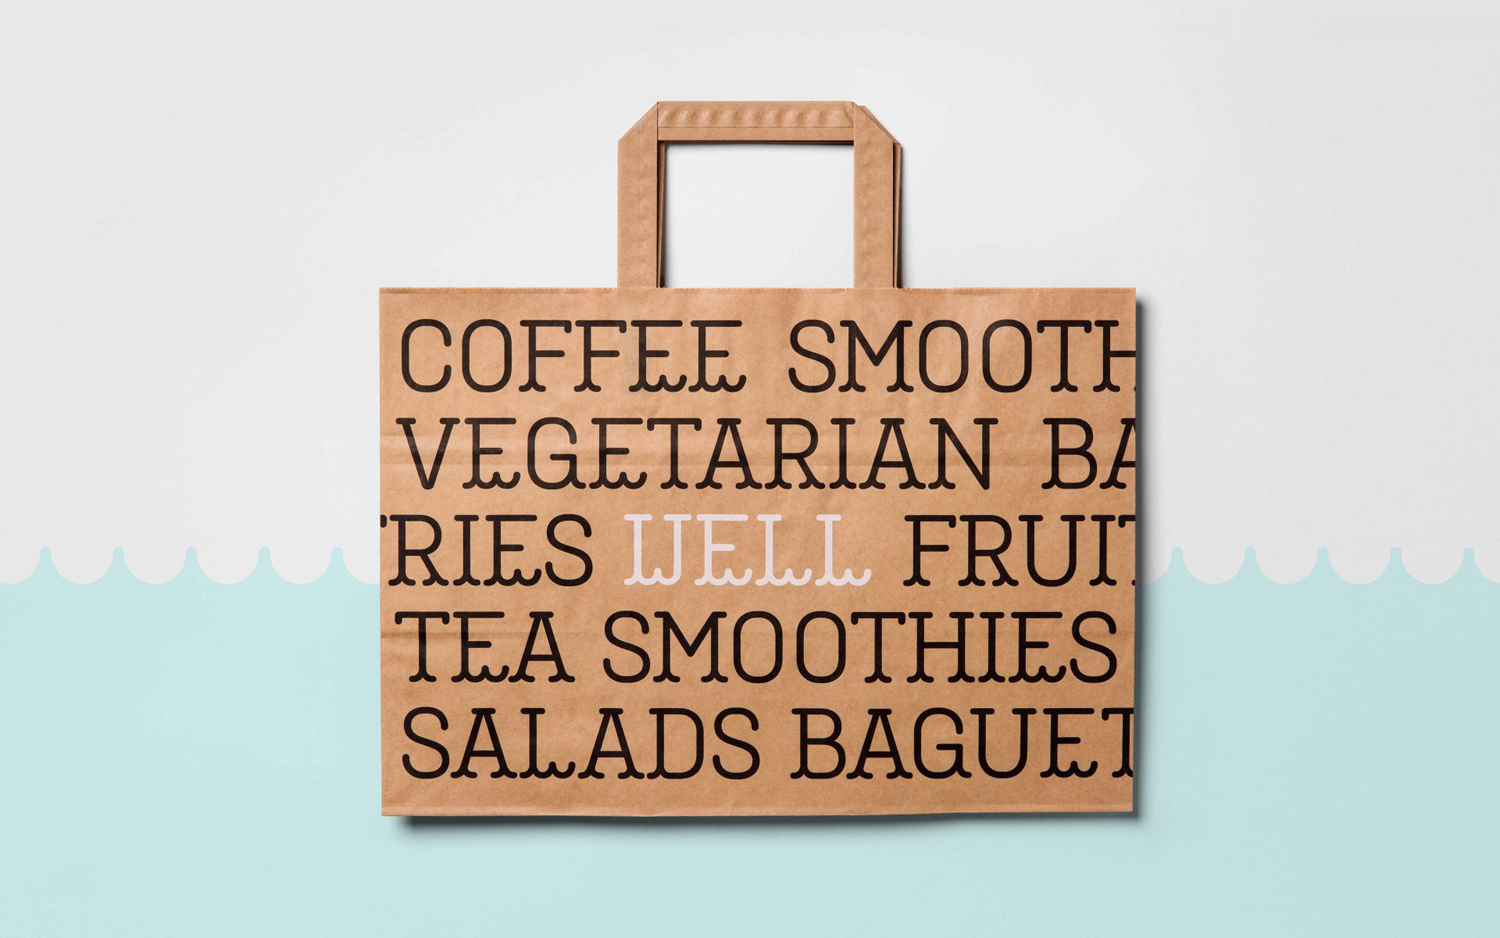 Brand identity and bag by Bond for Helsinki-based vegetarian café Well Coffee